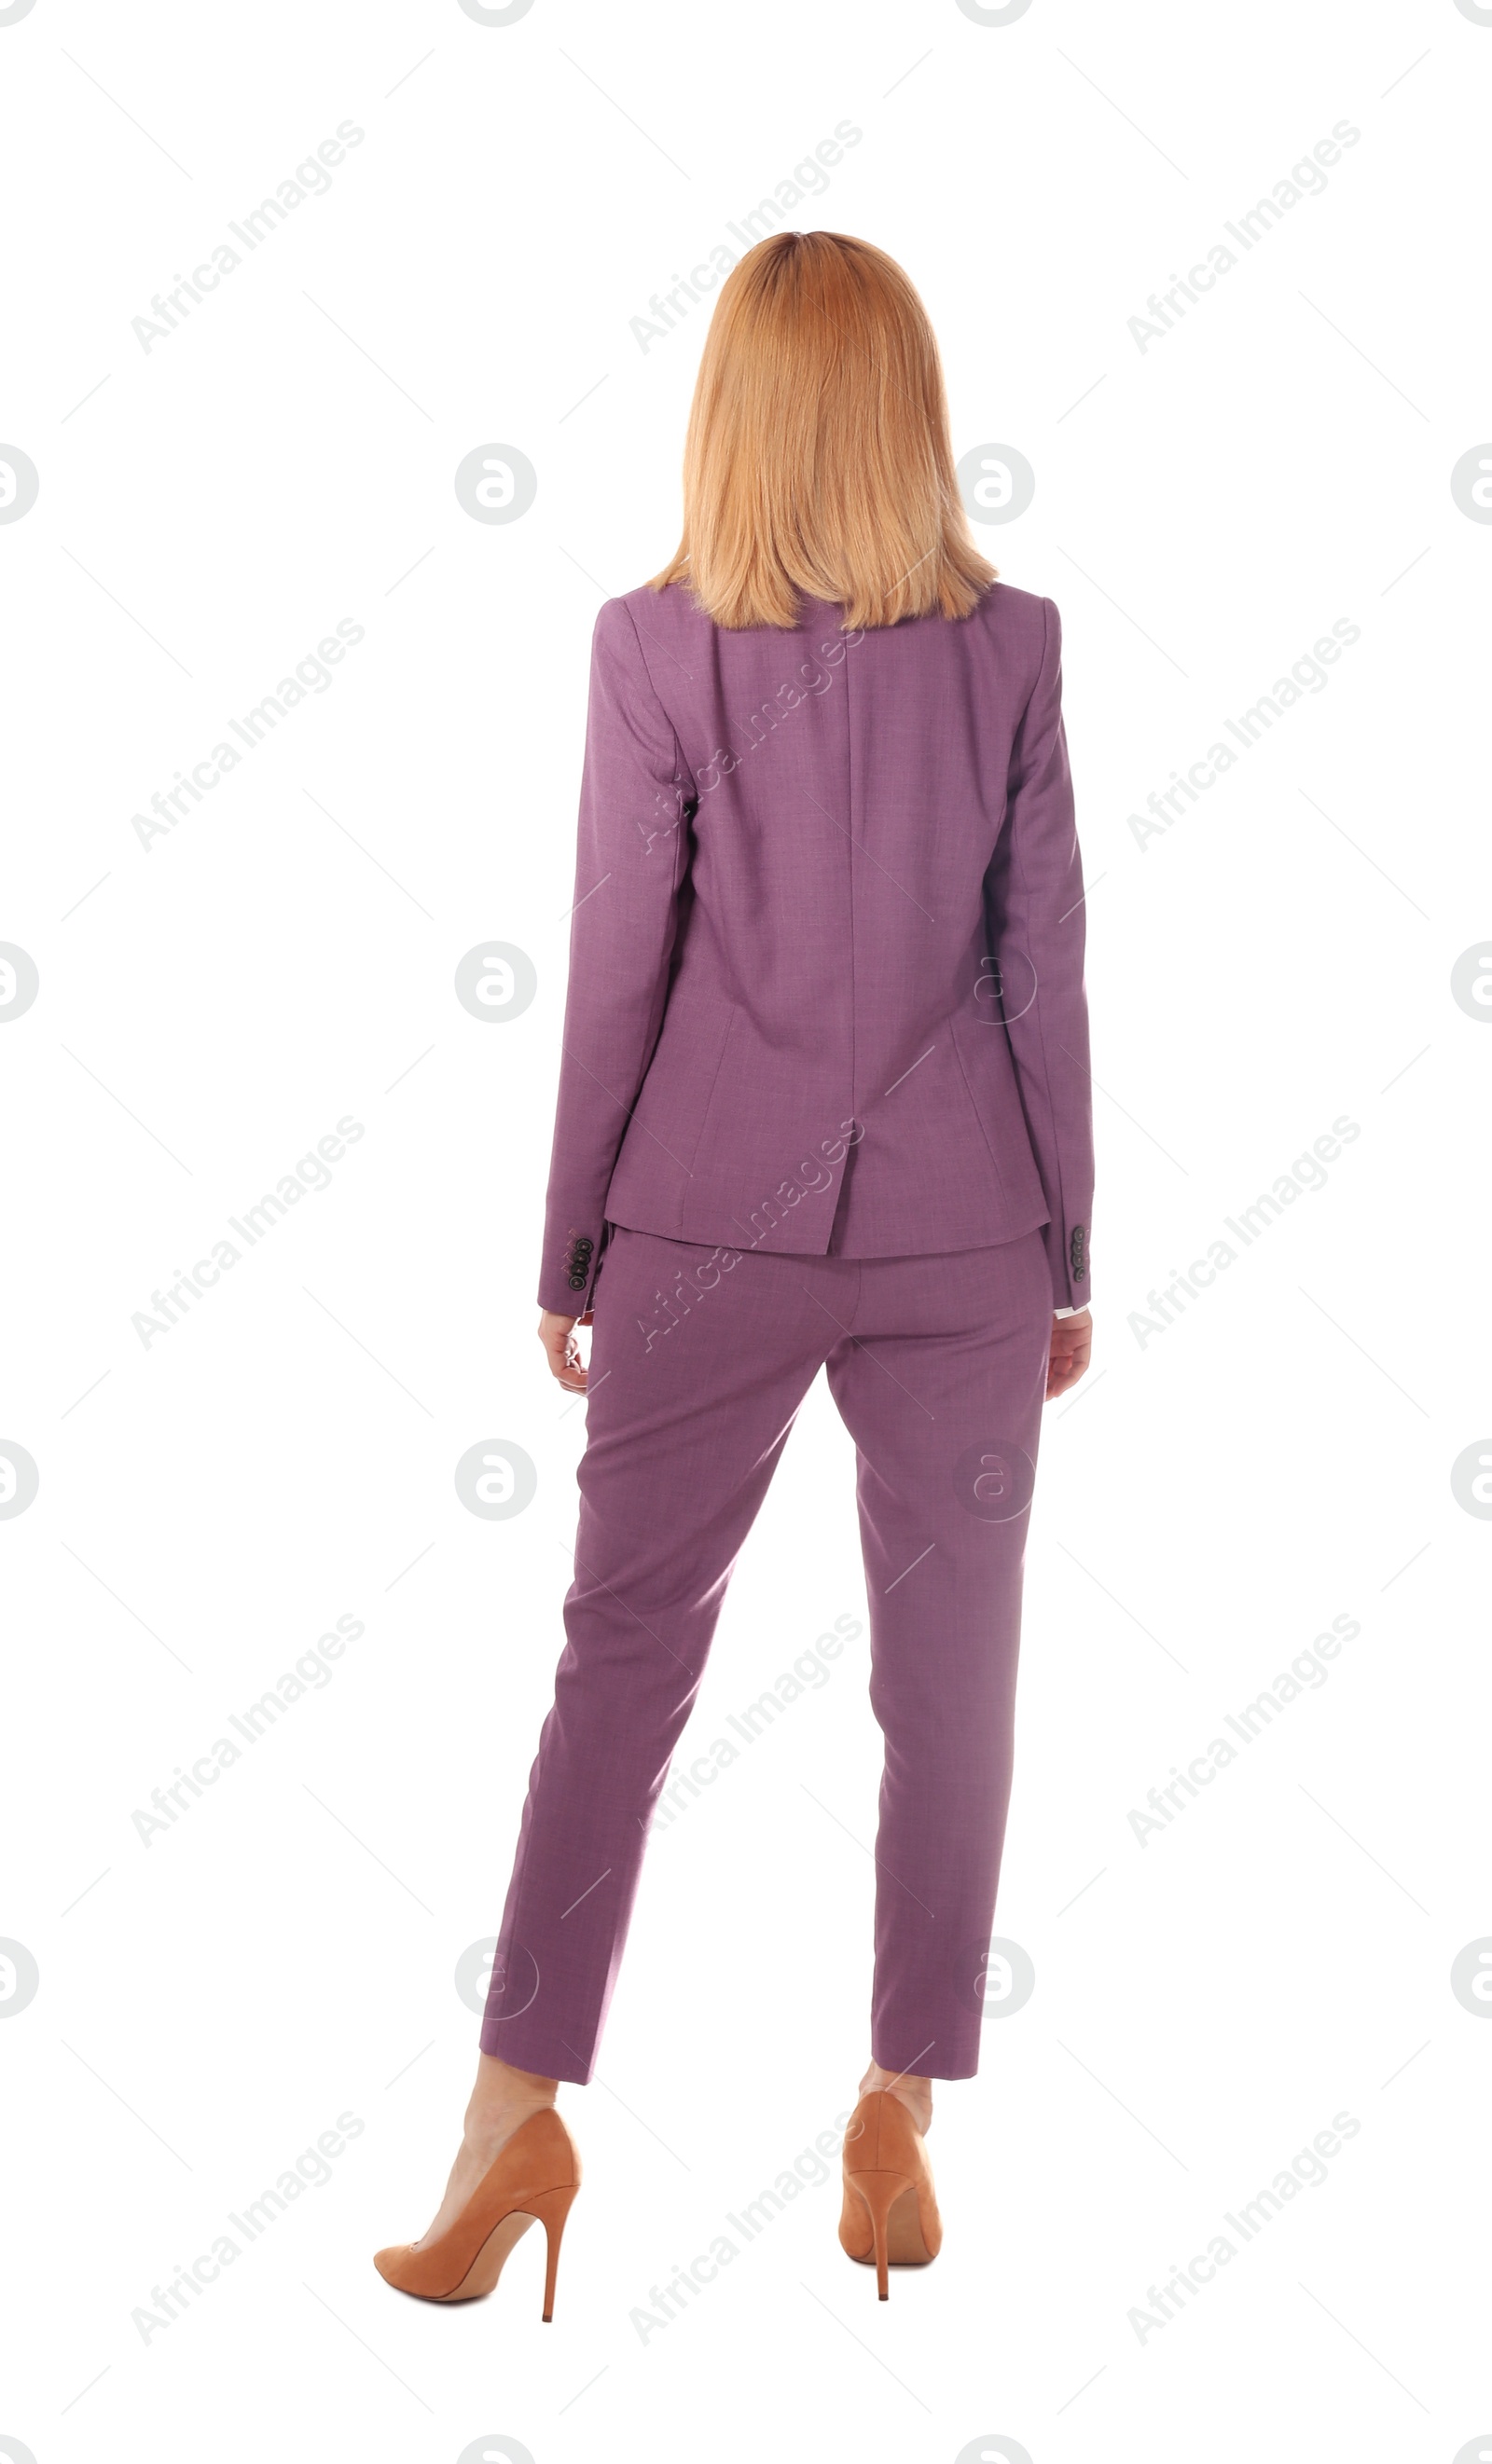 Photo of Businesswoman in stylish suit posing on white background